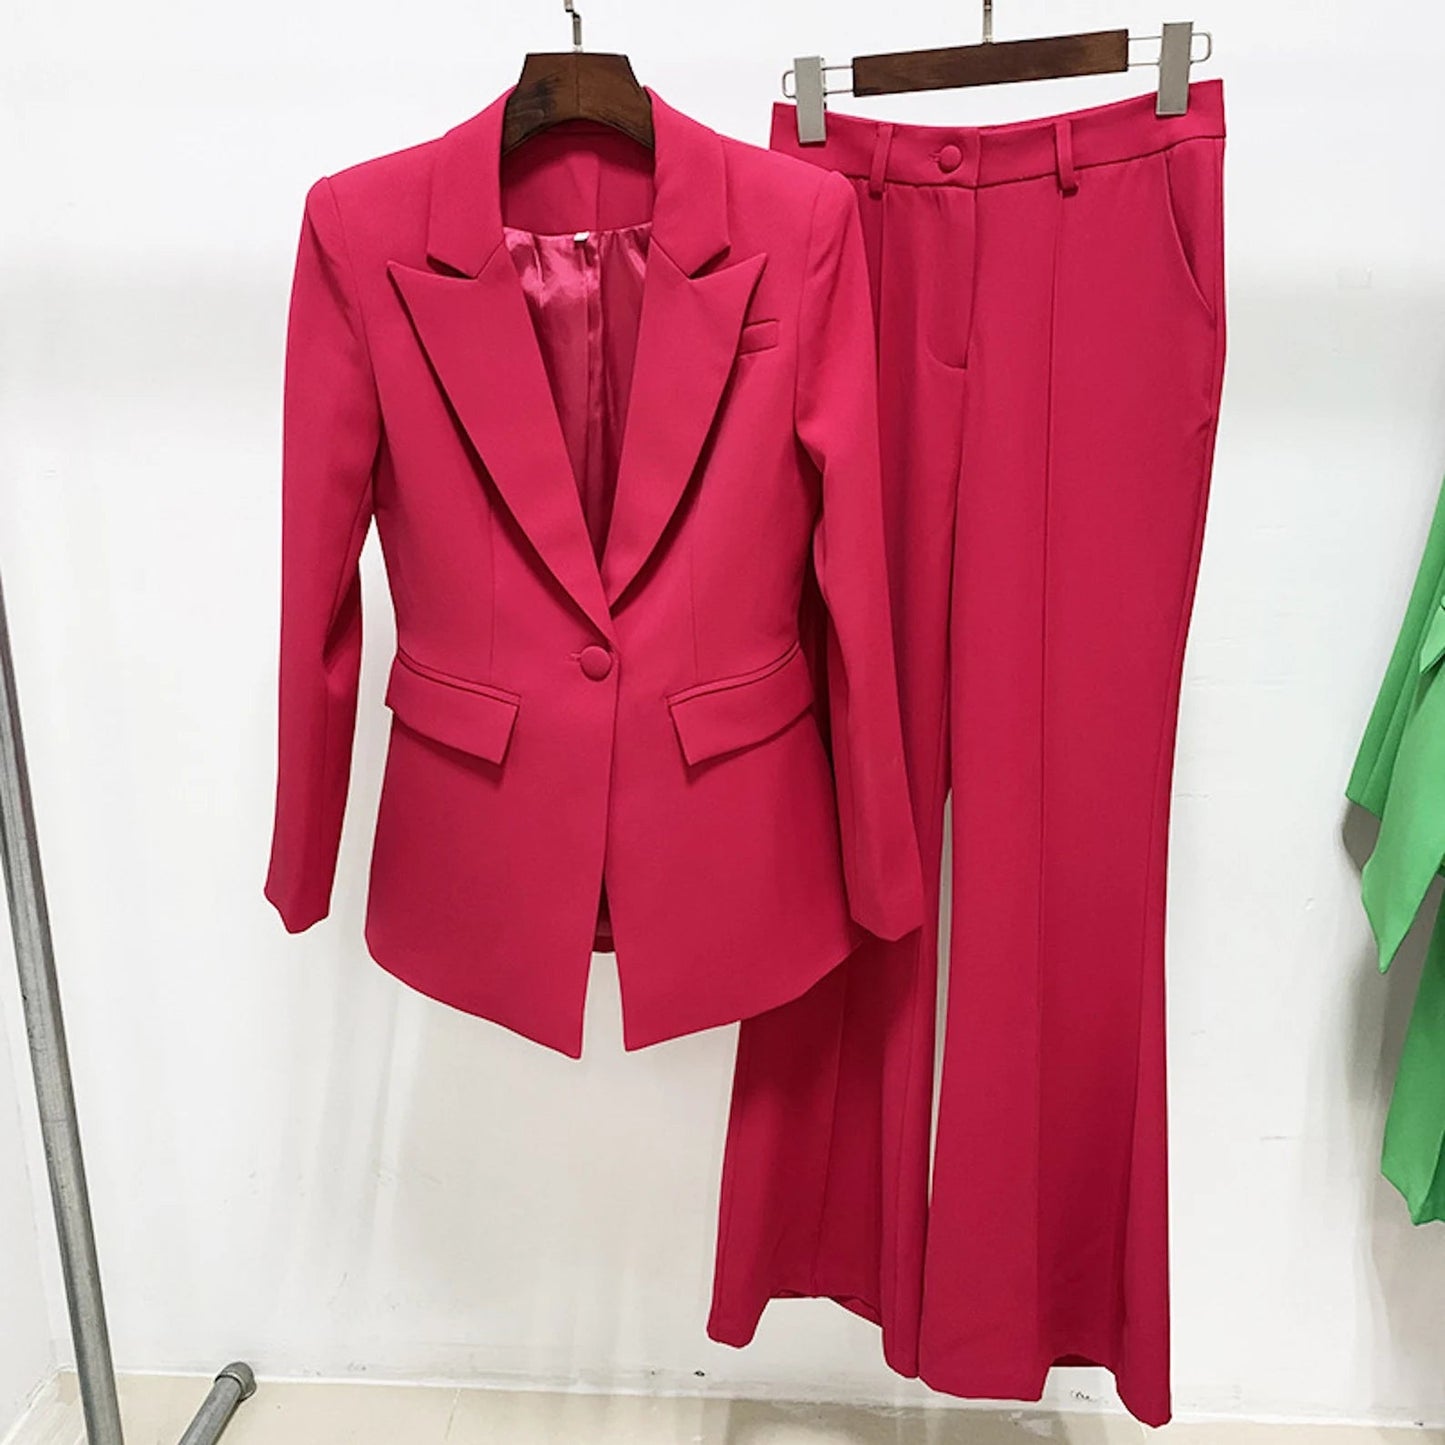 FashionPioneer - Red Pink Blazer Trouser Suit Set for Women ,We've got you covered from head to toe with this season's ideal pair of size trousers. This style is figure flattering, functional, and an essential addition to your new-season wardrobe. It is made with extra fabric to ensure a perfect fit. Combine plus size wide leg trousers with a lace bodysuit and barely-there heels for a look that will not go unnoticed.